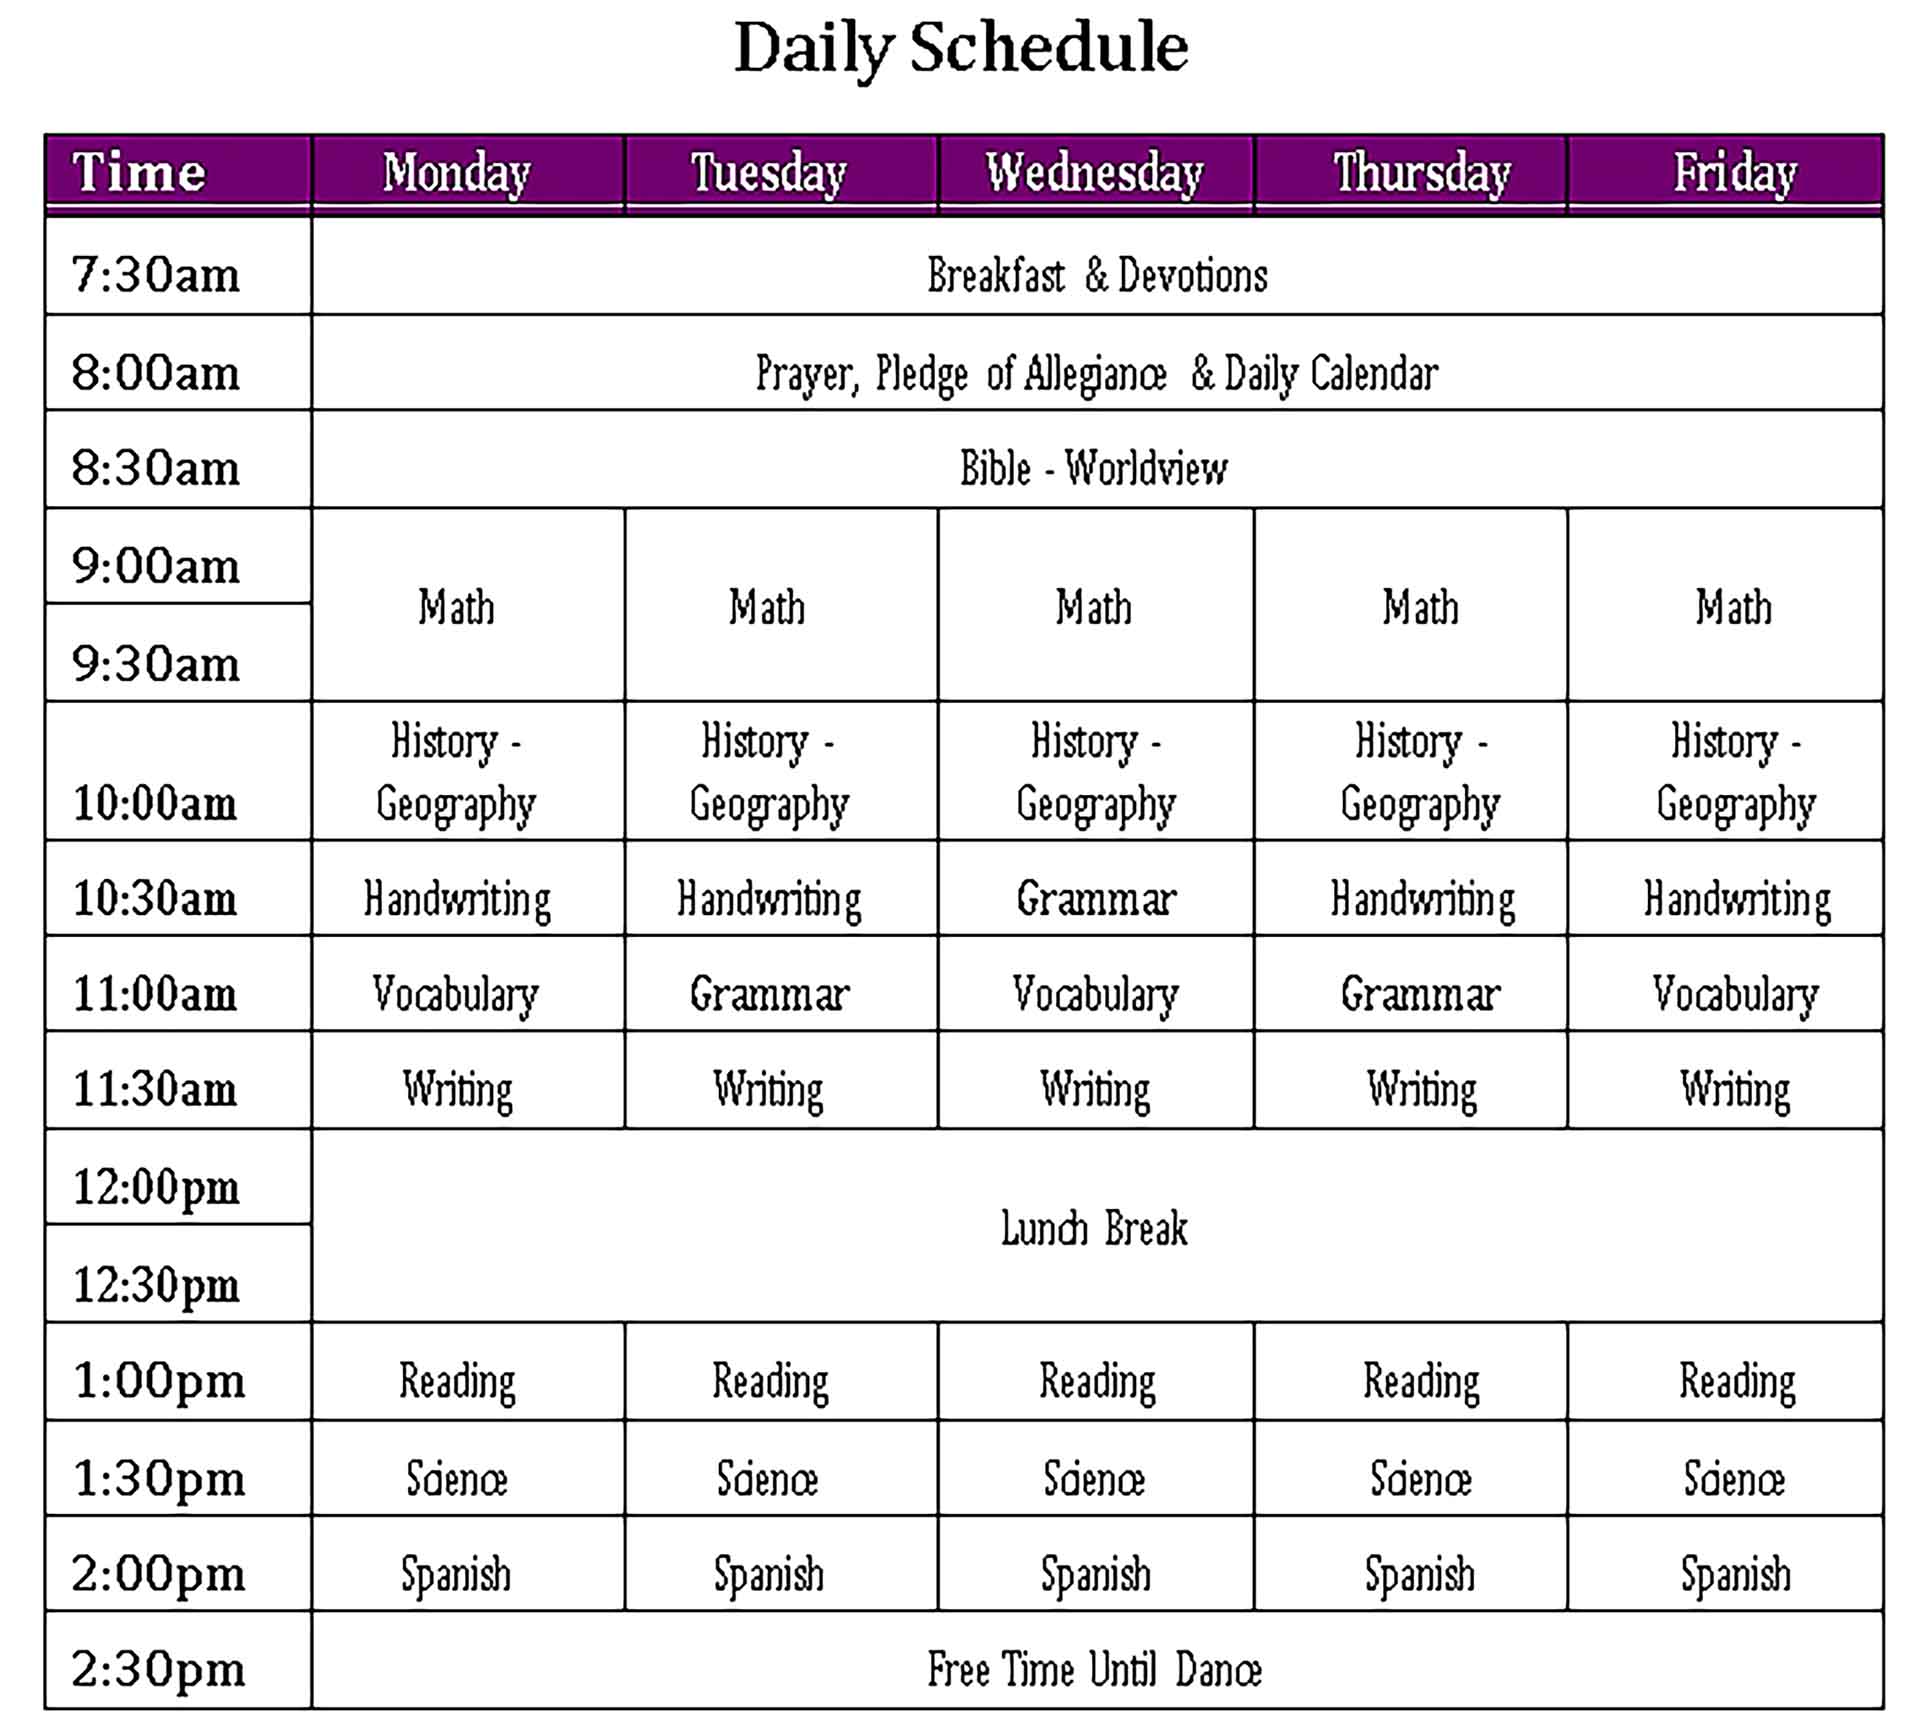 Template Daily Schedule Sample 1